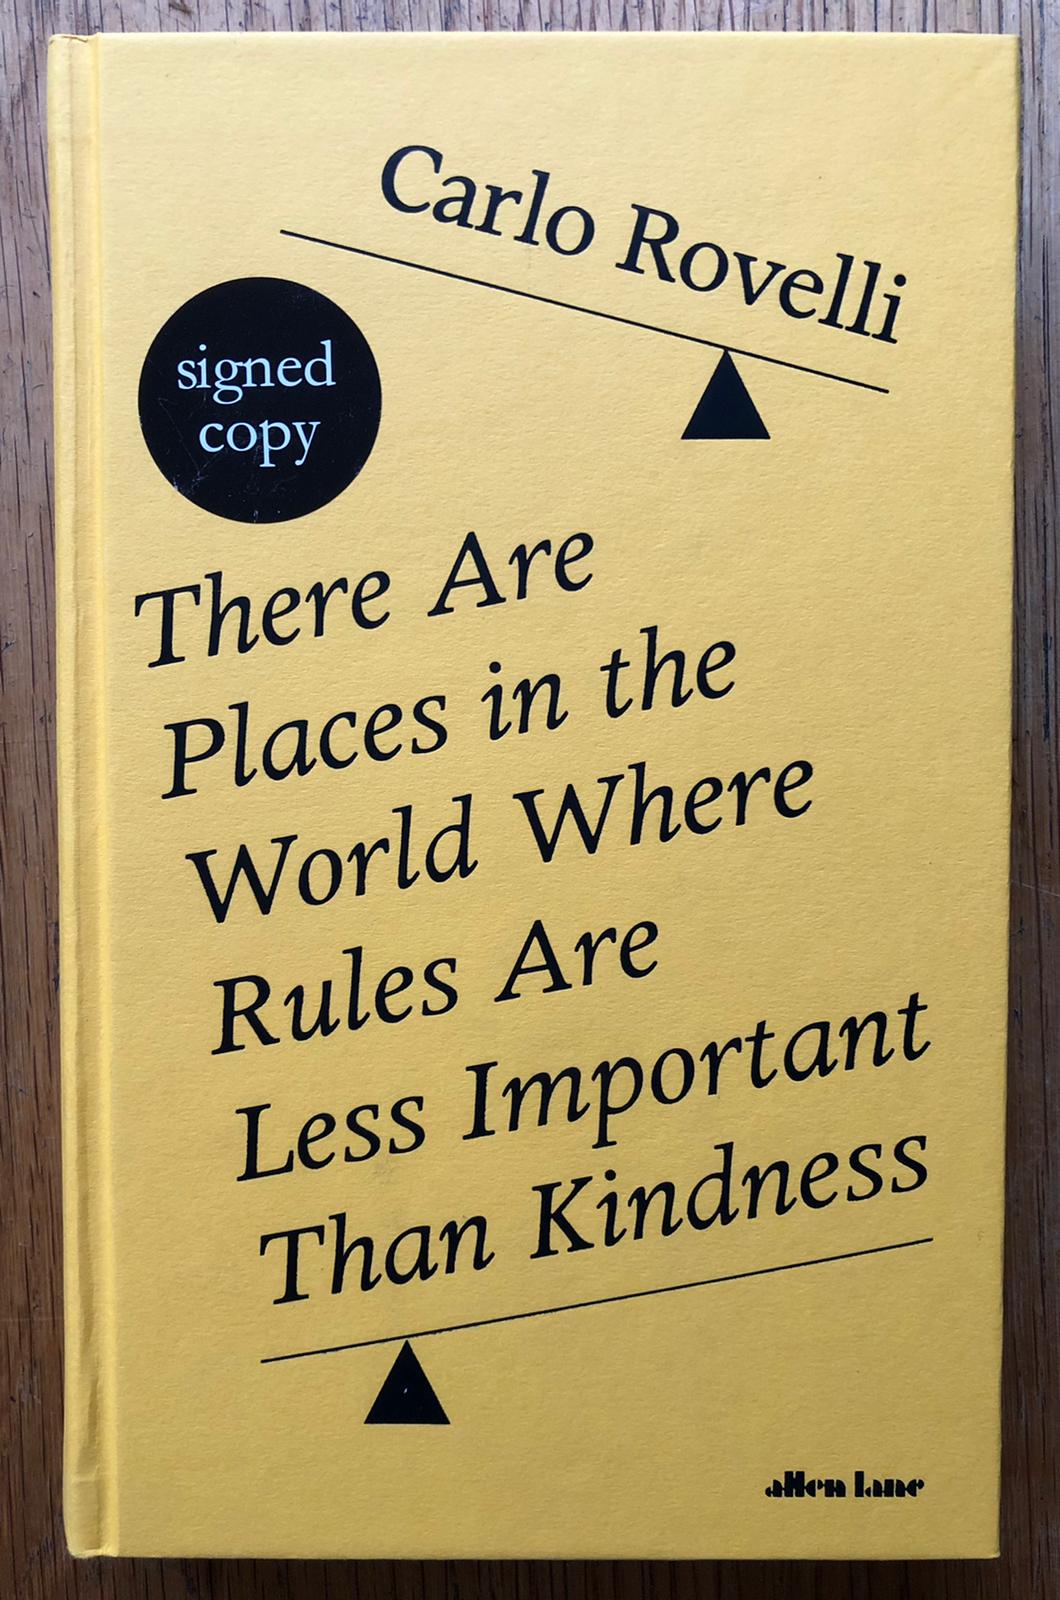 There Are Places In The World Where Rules Are Less Important Than